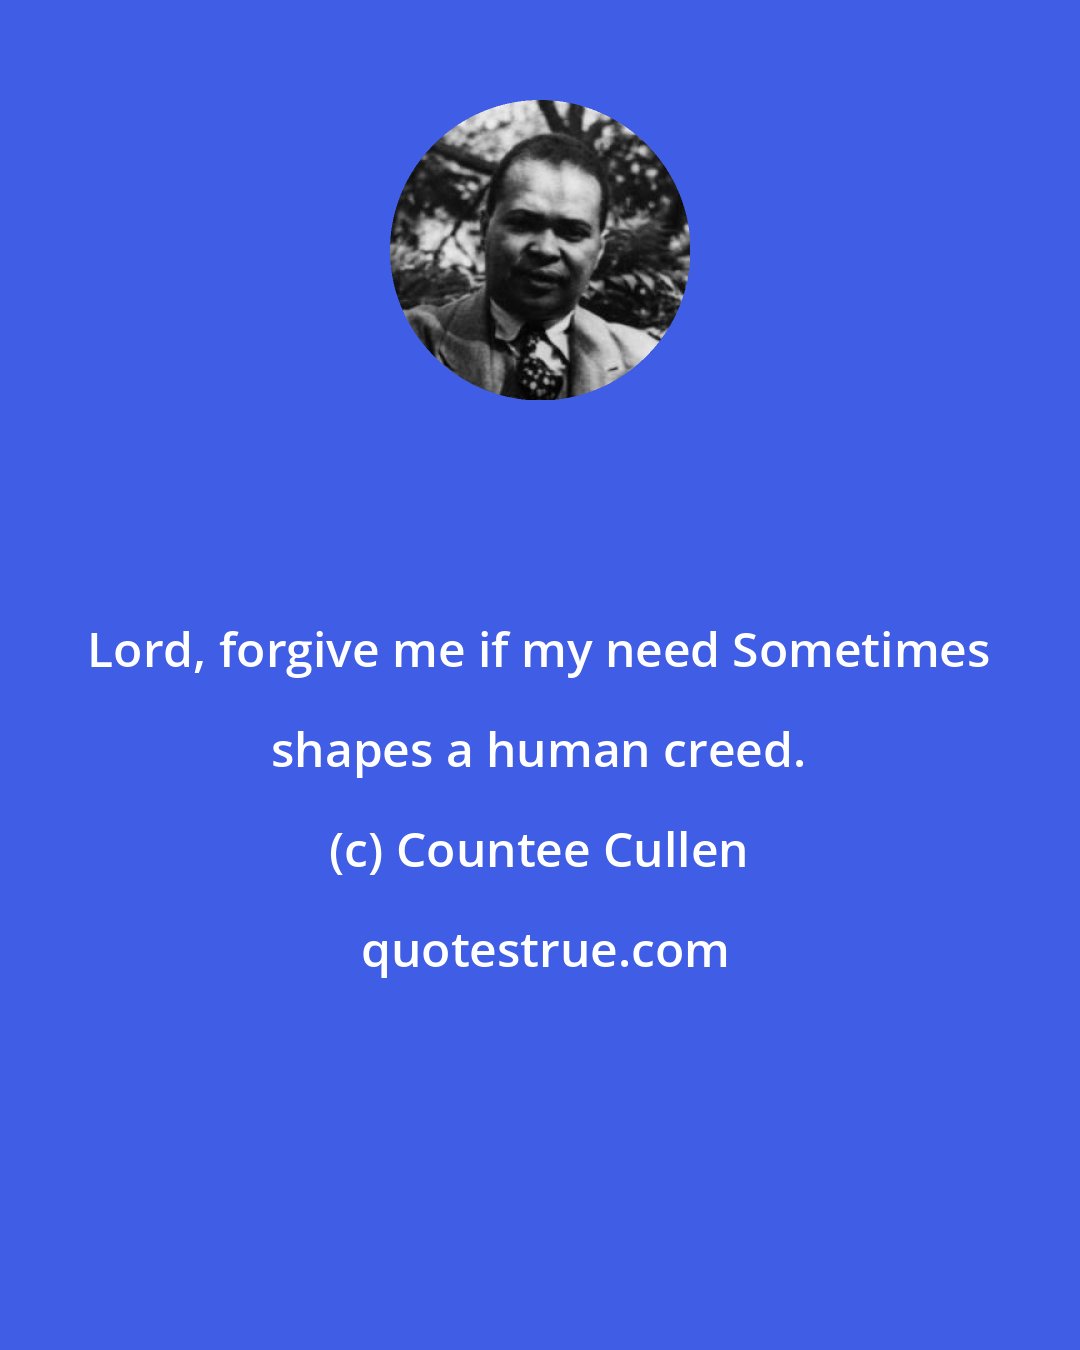 Countee Cullen: Lord, forgive me if my need Sometimes shapes a human creed.